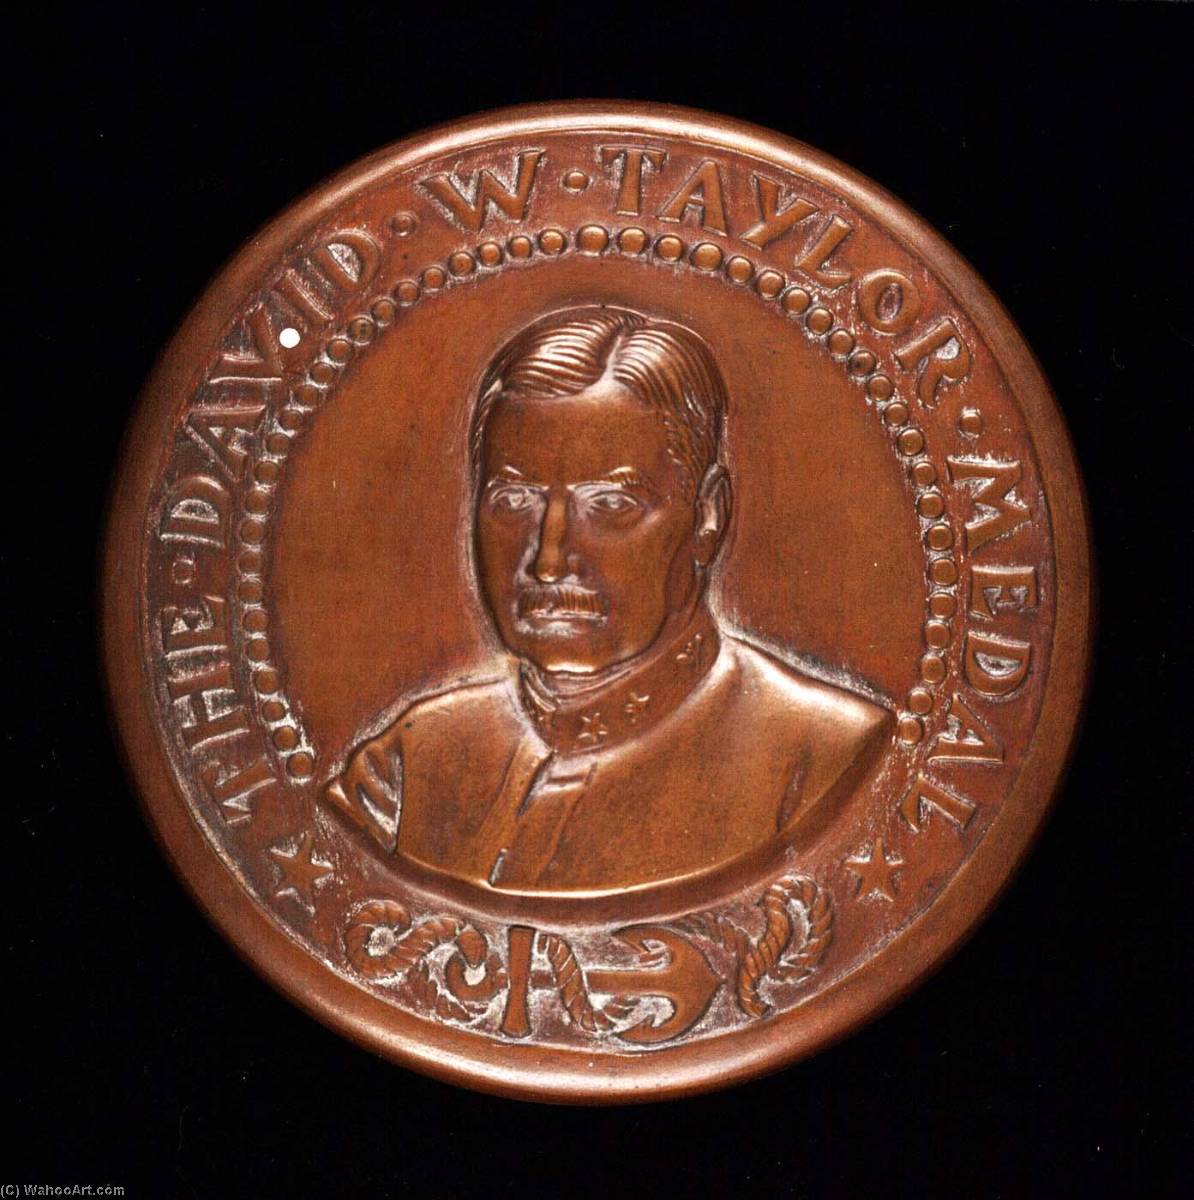 WikiOO.org - دایره المعارف هنرهای زیبا - نقاشی، آثار هنری Anthony De Francisci - David W. Taylor Medal Awarded for Notable Achievement in Navy Architecture and Marine Engineering (obverse)